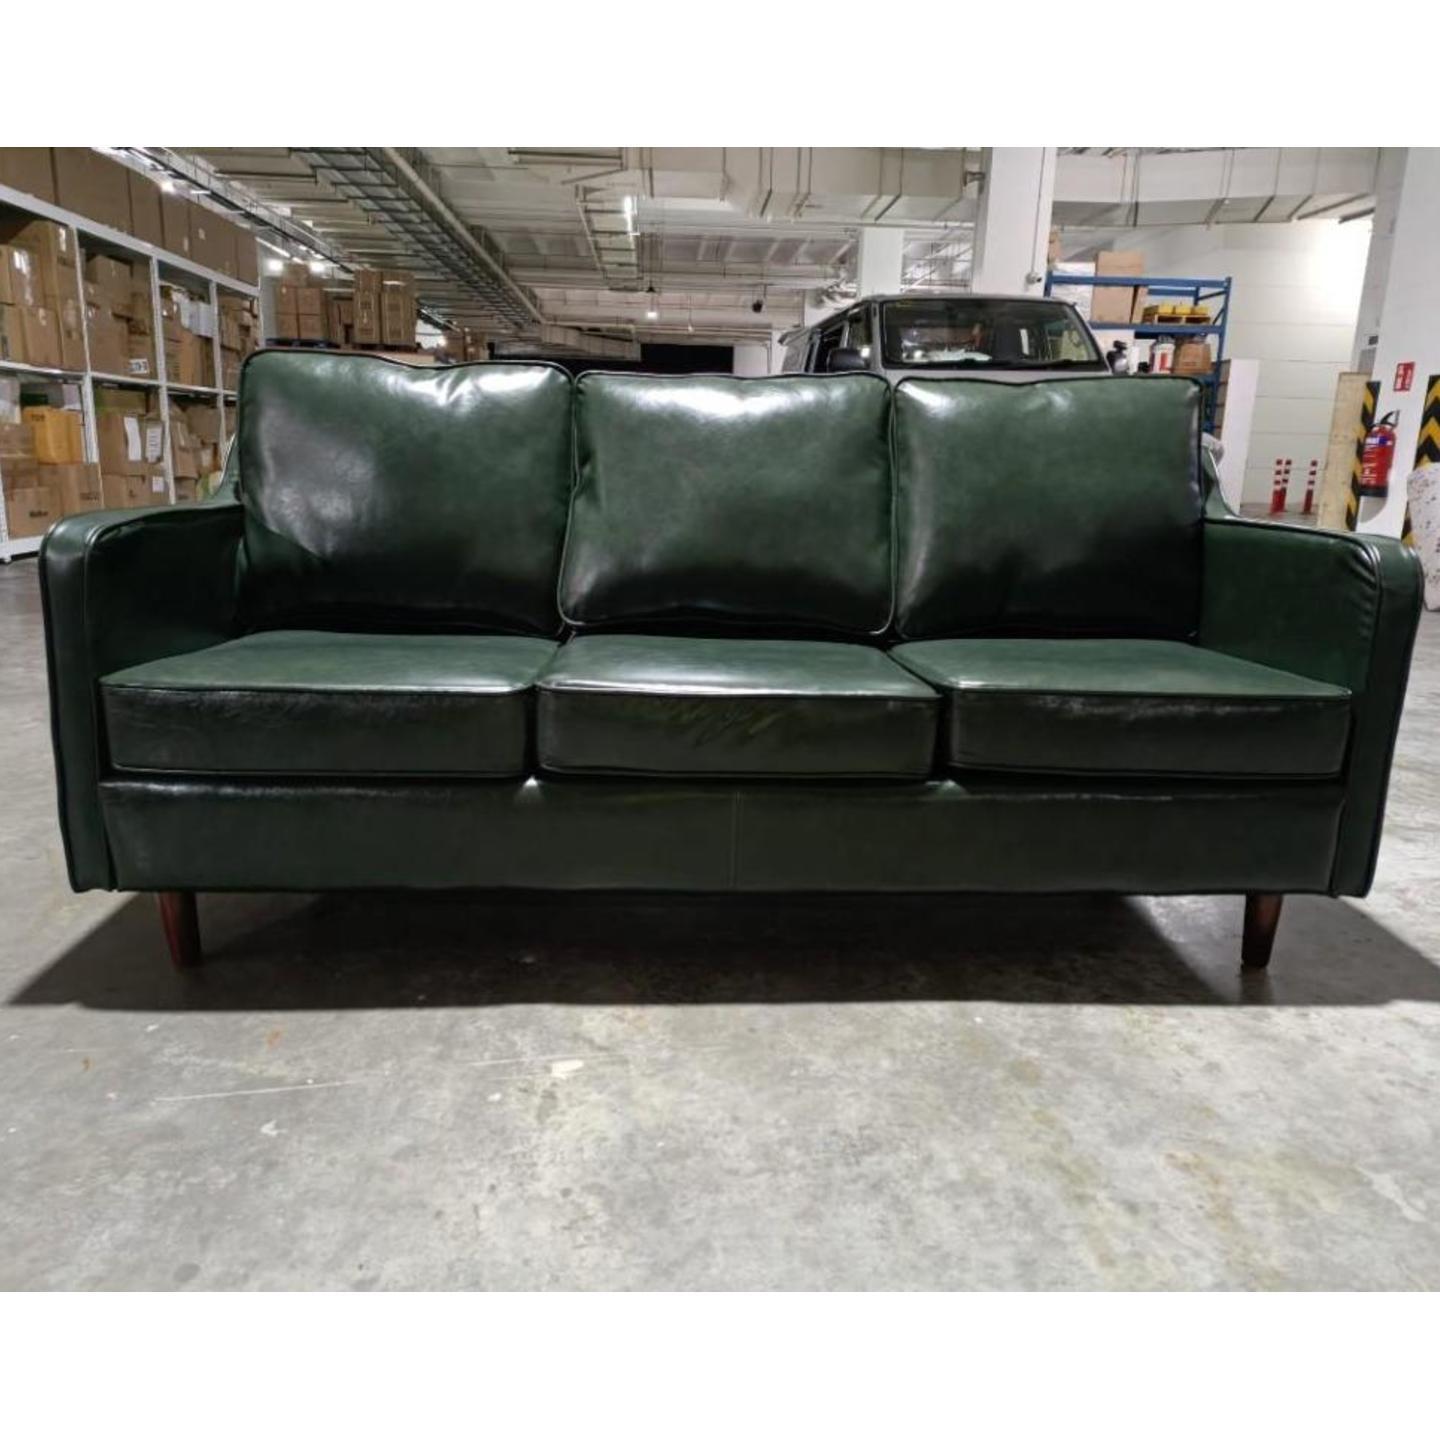 PRE ORDER VALENTE Designer 3 Seater Sofa in EMERALD GREEN PU - Estimated for Delivery by End June 2022